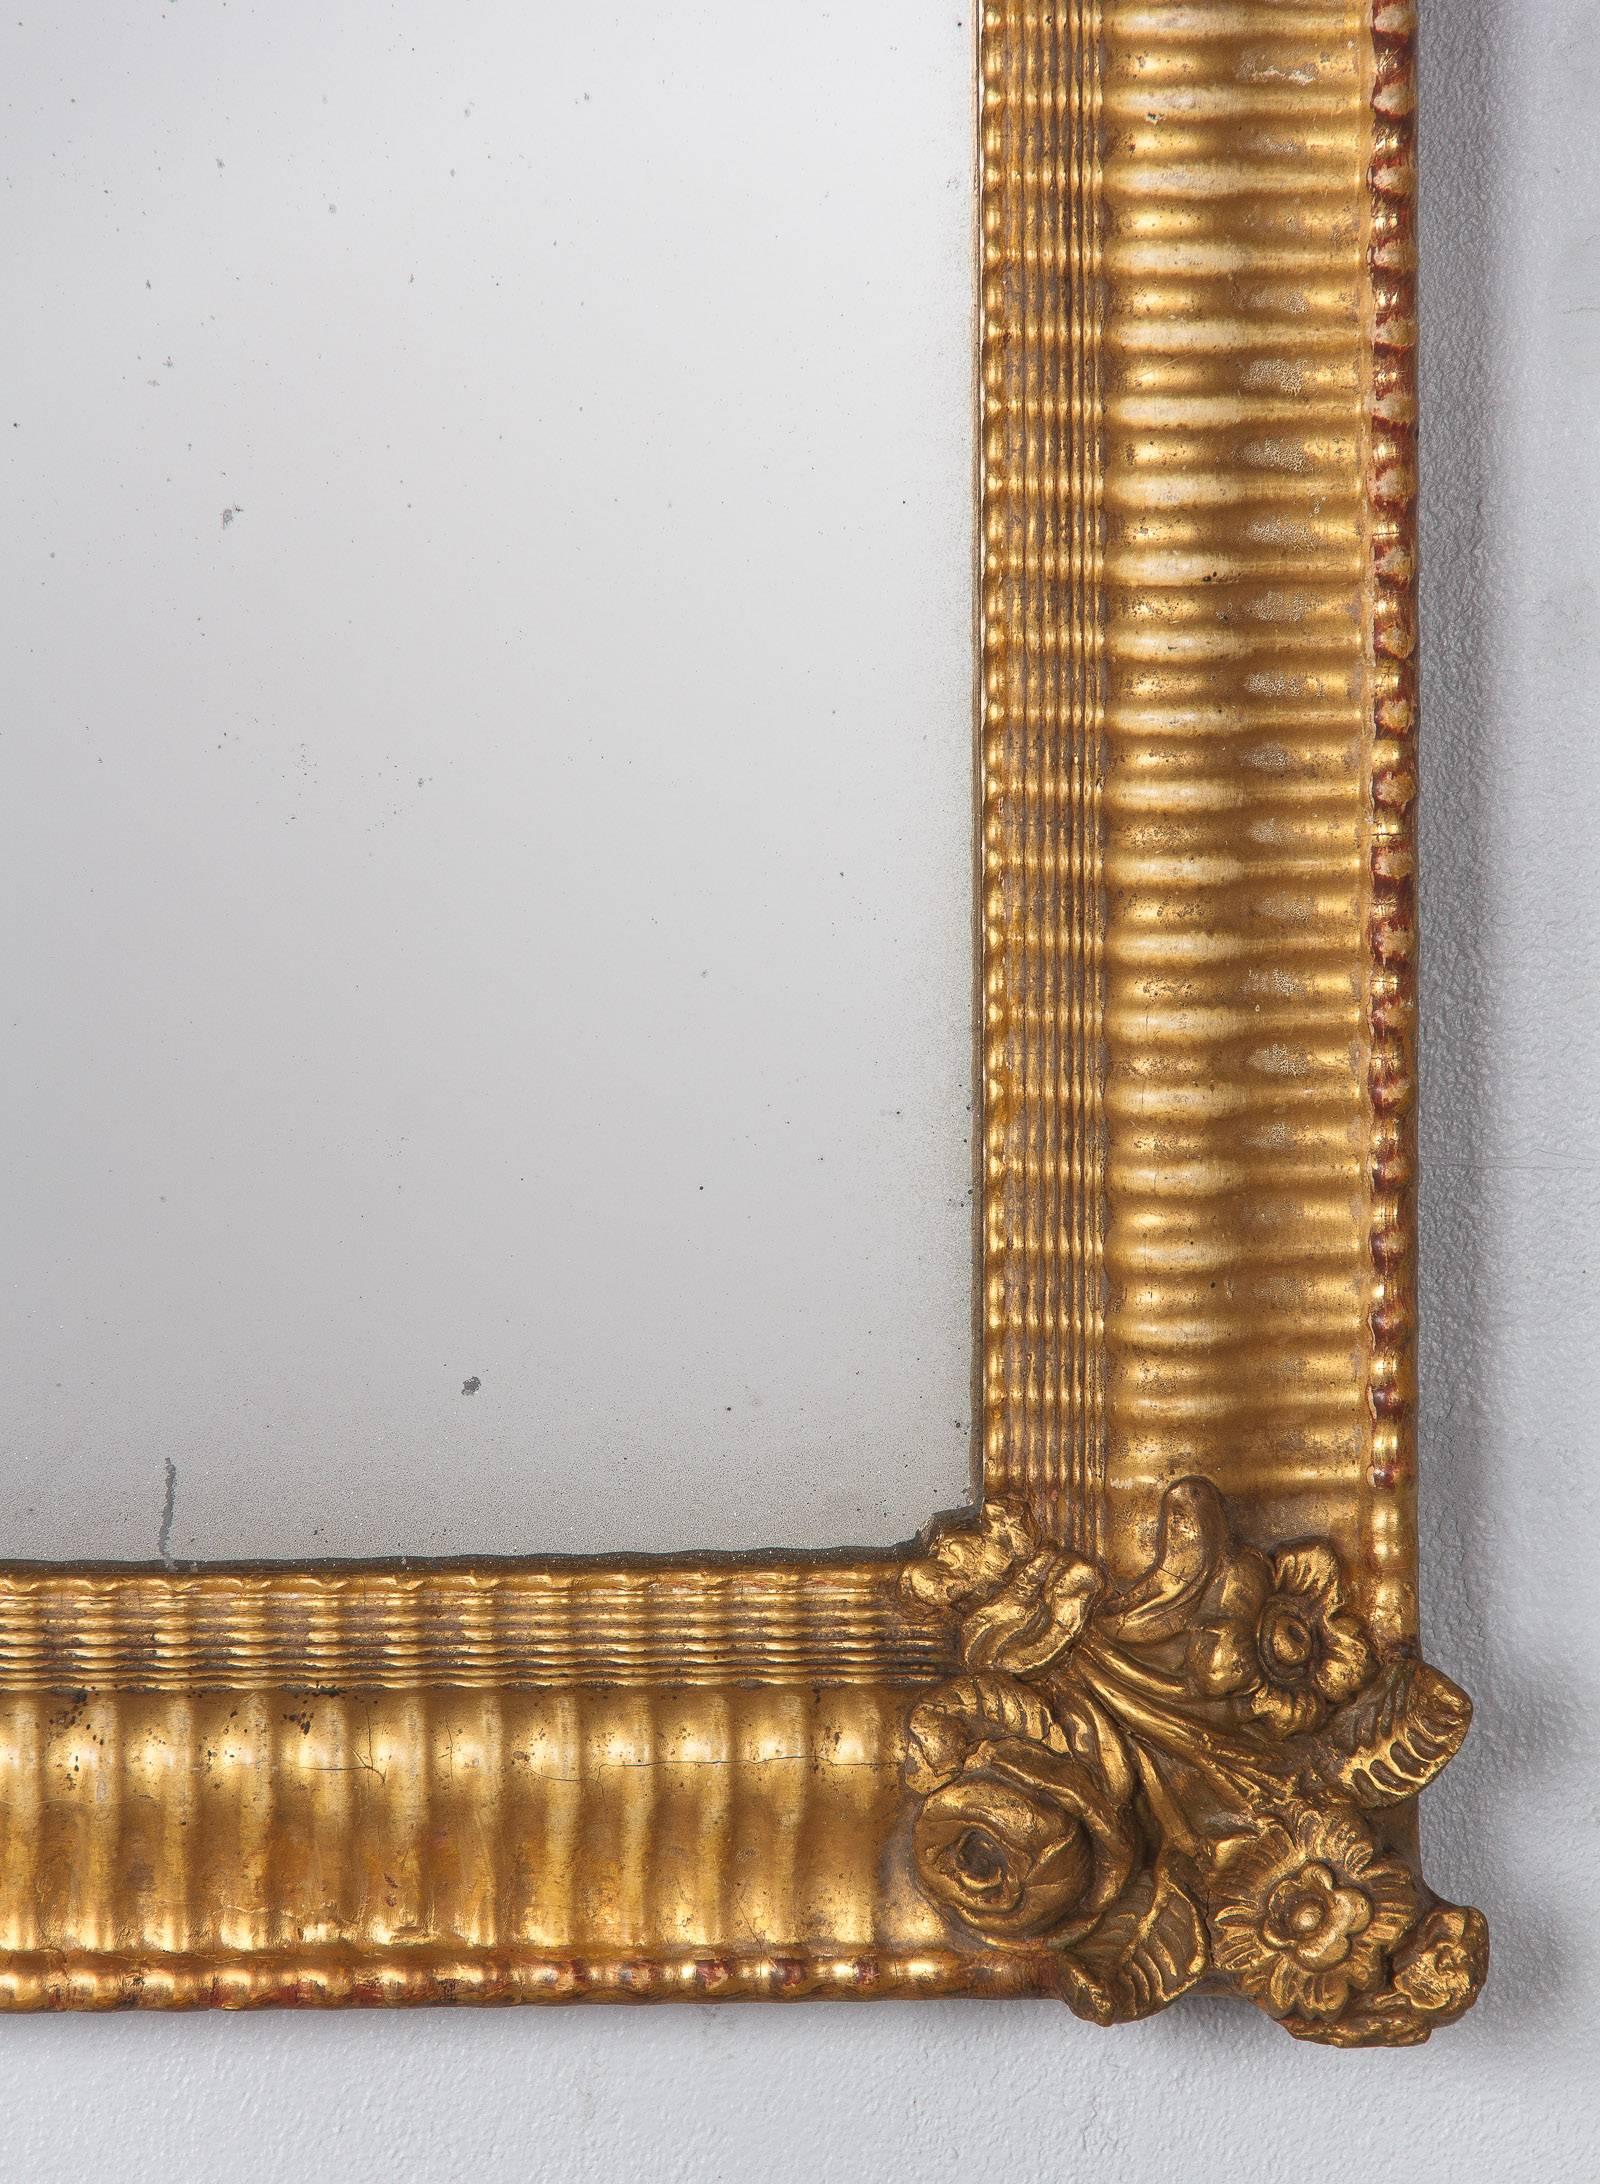 19th Century French Empire Period Gilded Mirror, Early 1800s